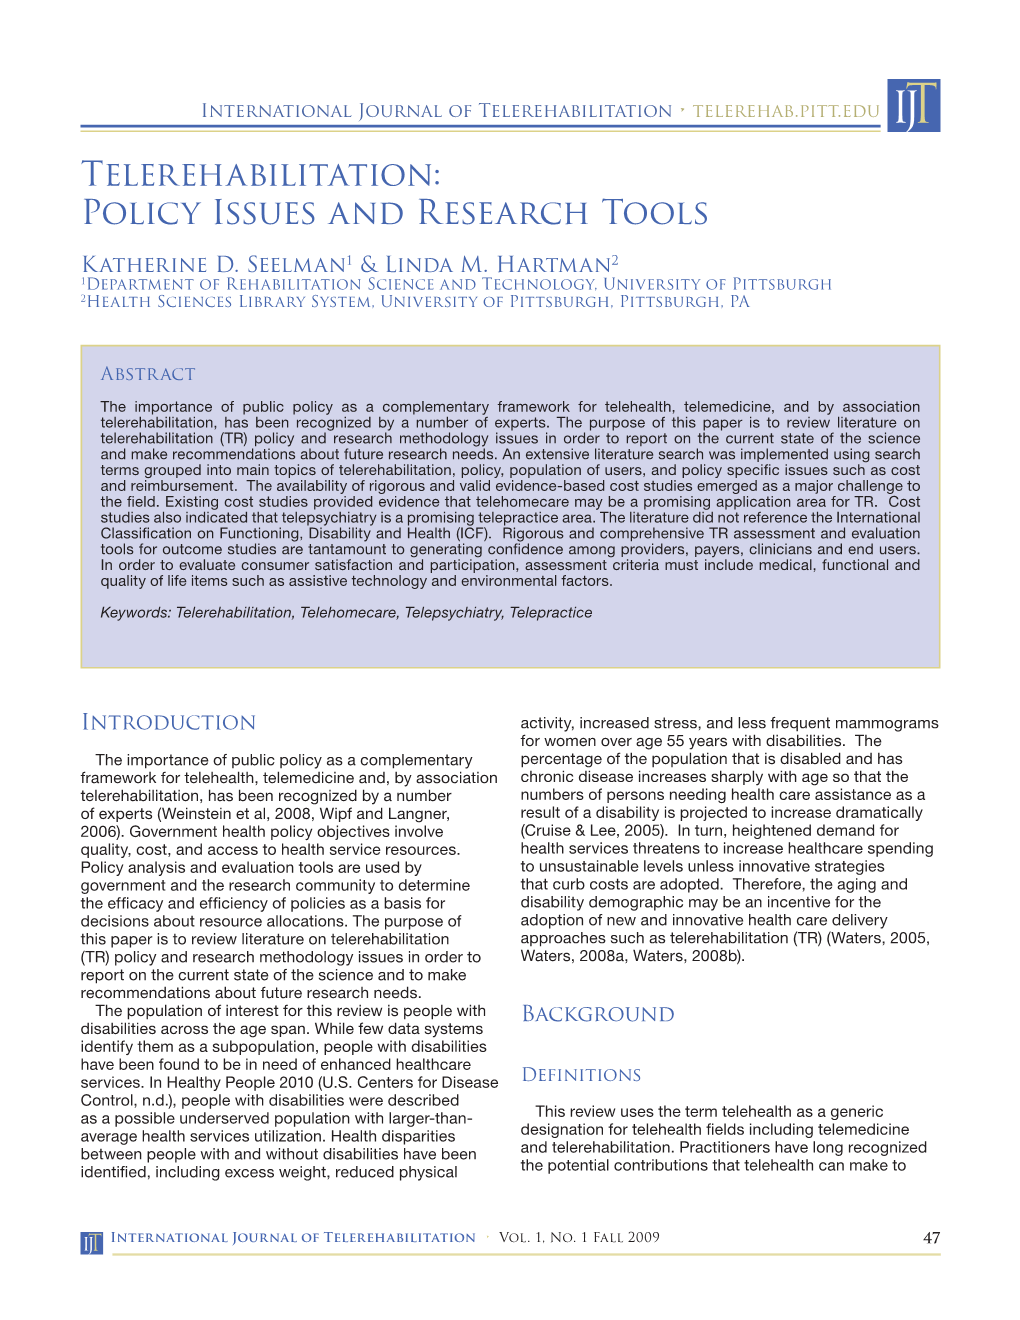 Telerehabilitation: Policy Issues and Research Tools